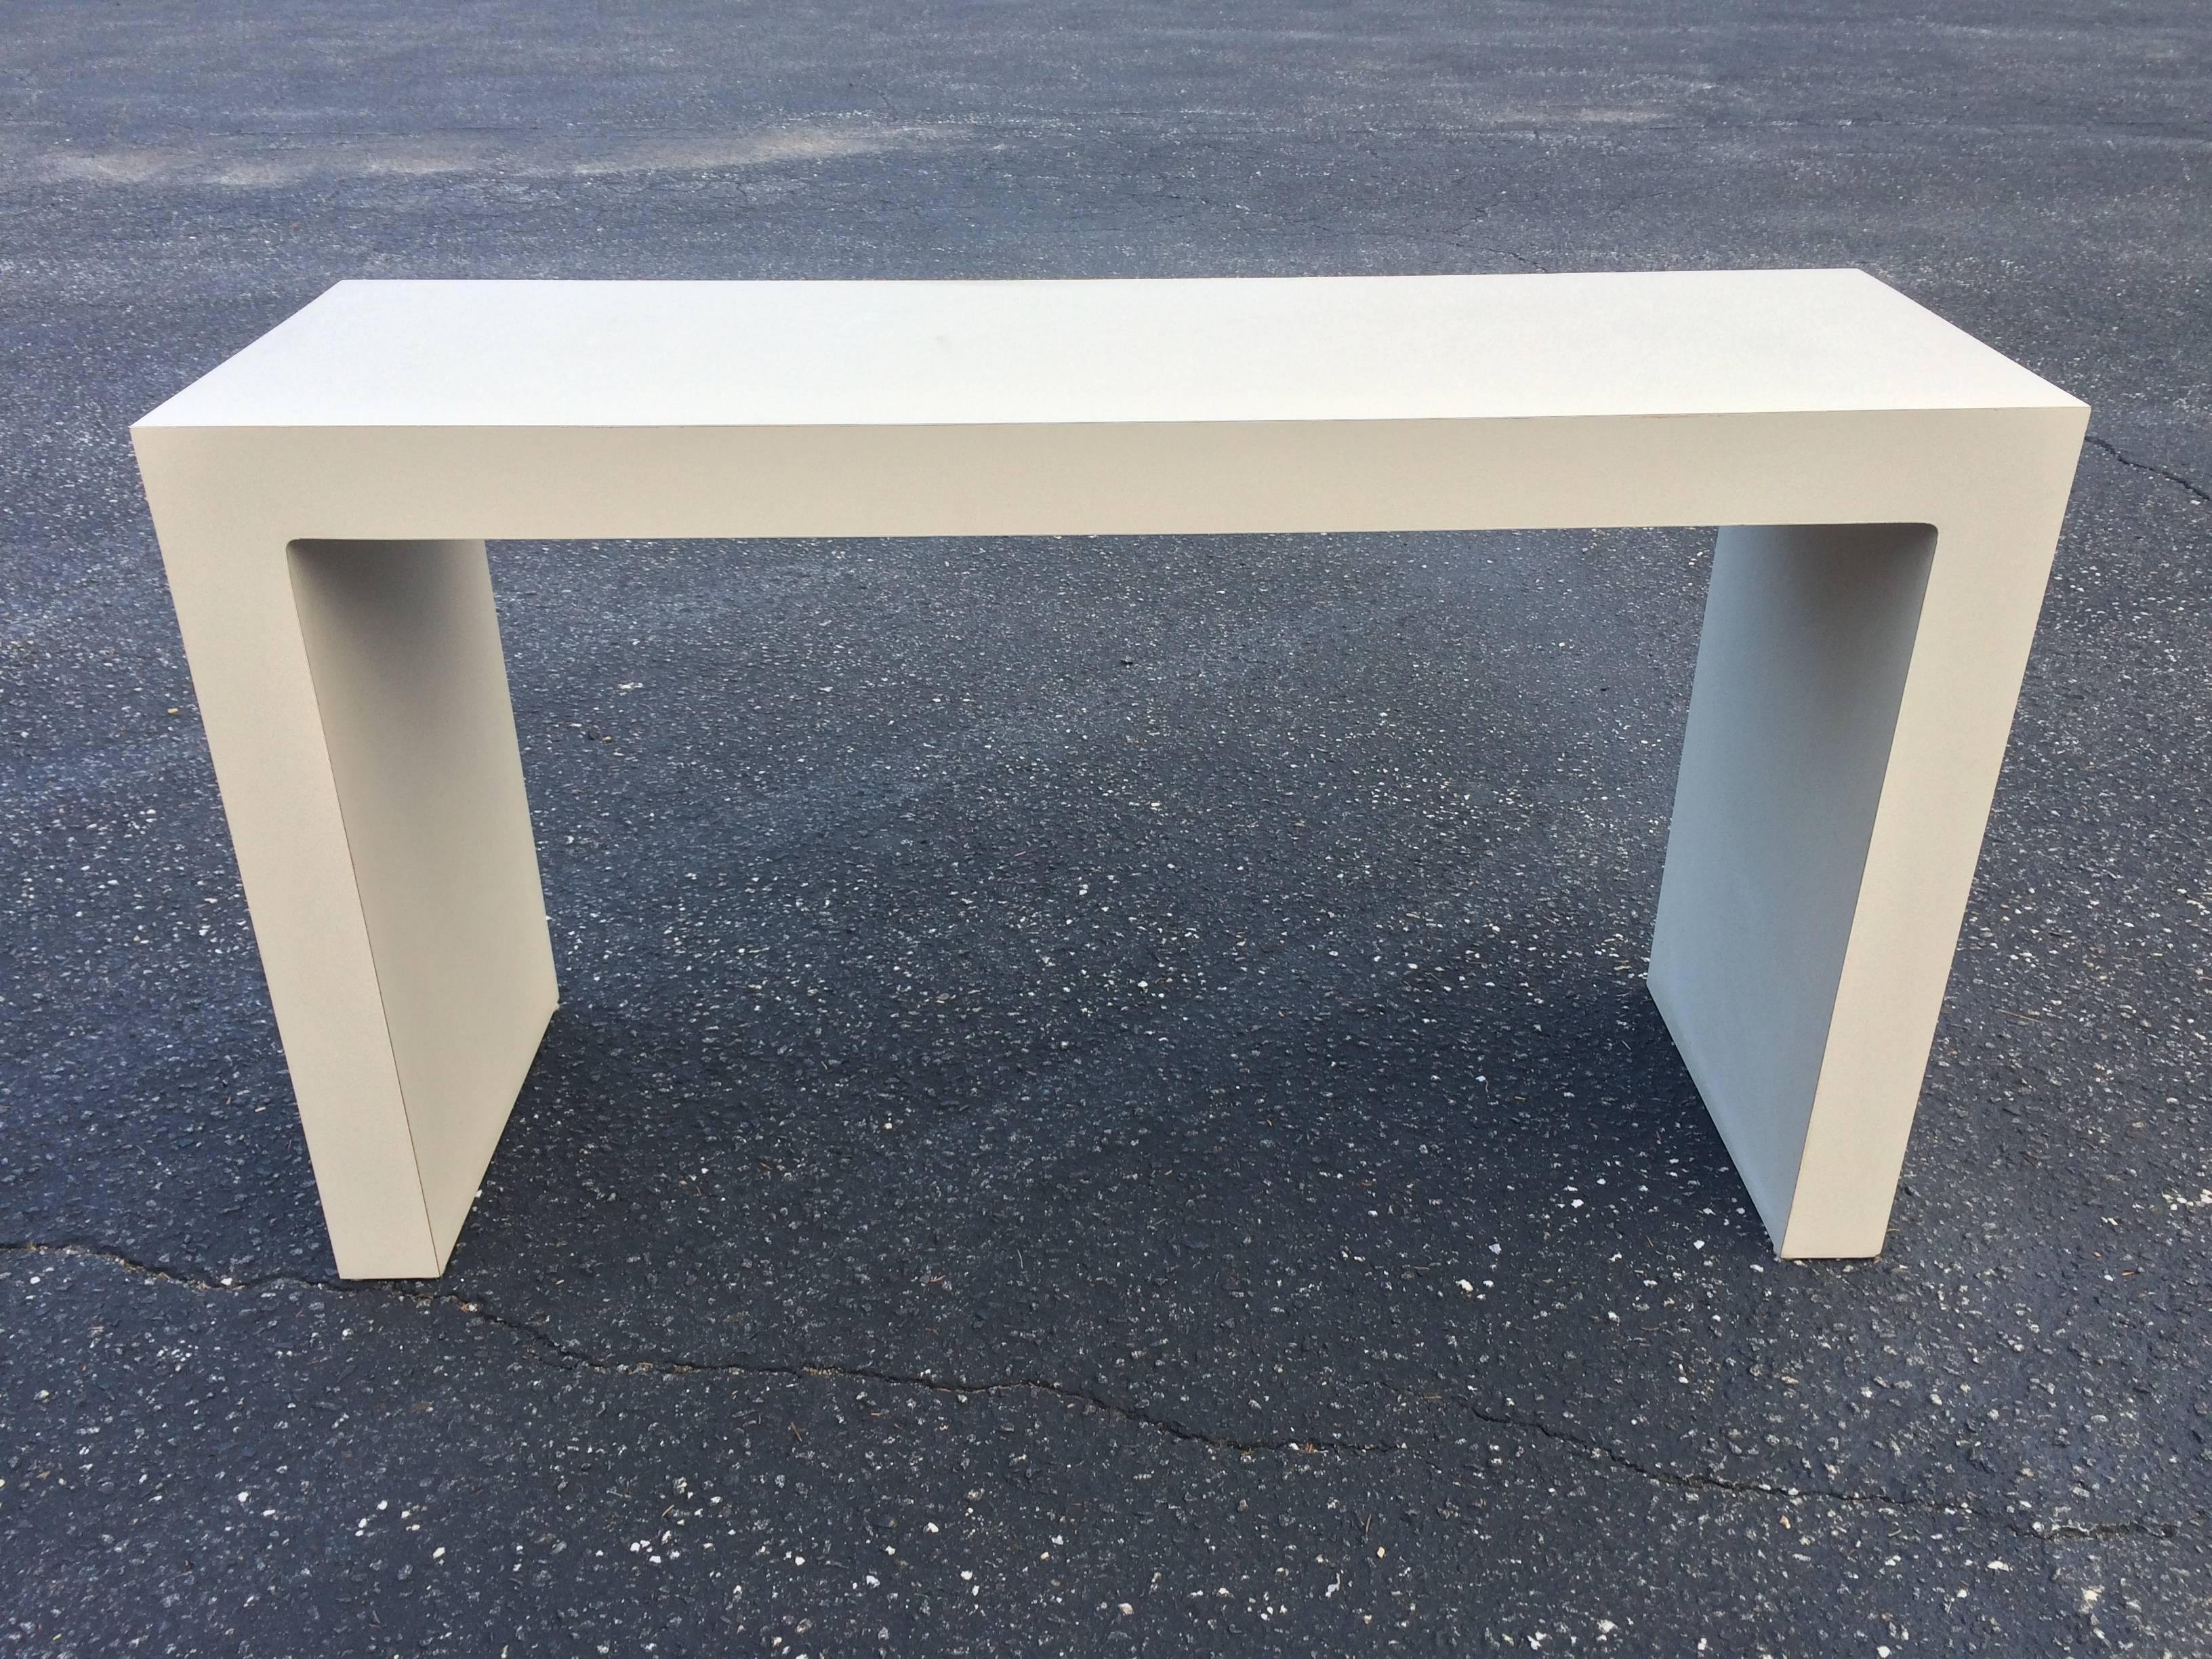 Midcentury off-white Parsons table. Perfect as a sofa table or console table. Can be used in any room wanting clean minimalist lines.Measures: 27 H x 47.57 L x 15.57 D.